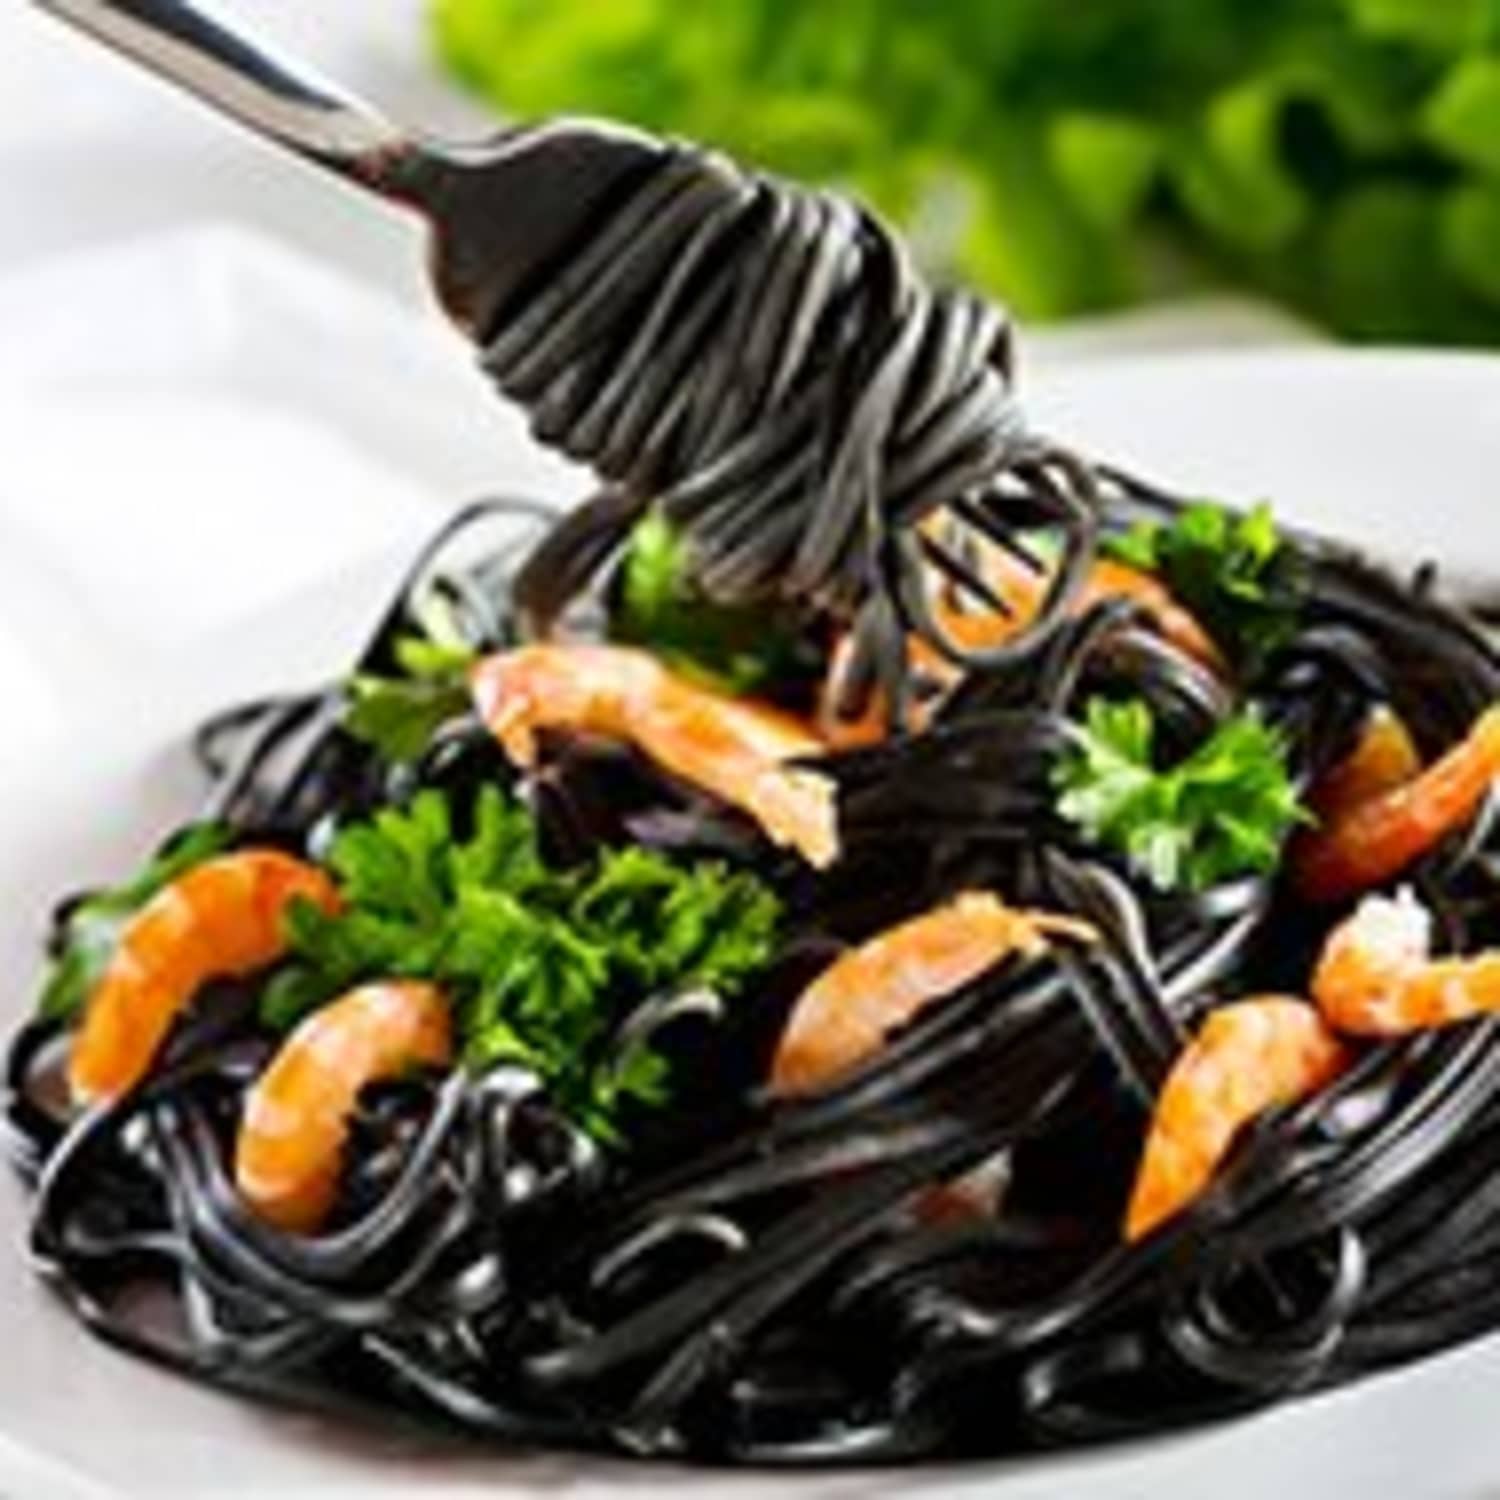 What Special Dish Should I Make With My Squid Ink Pasta? | Kitchn